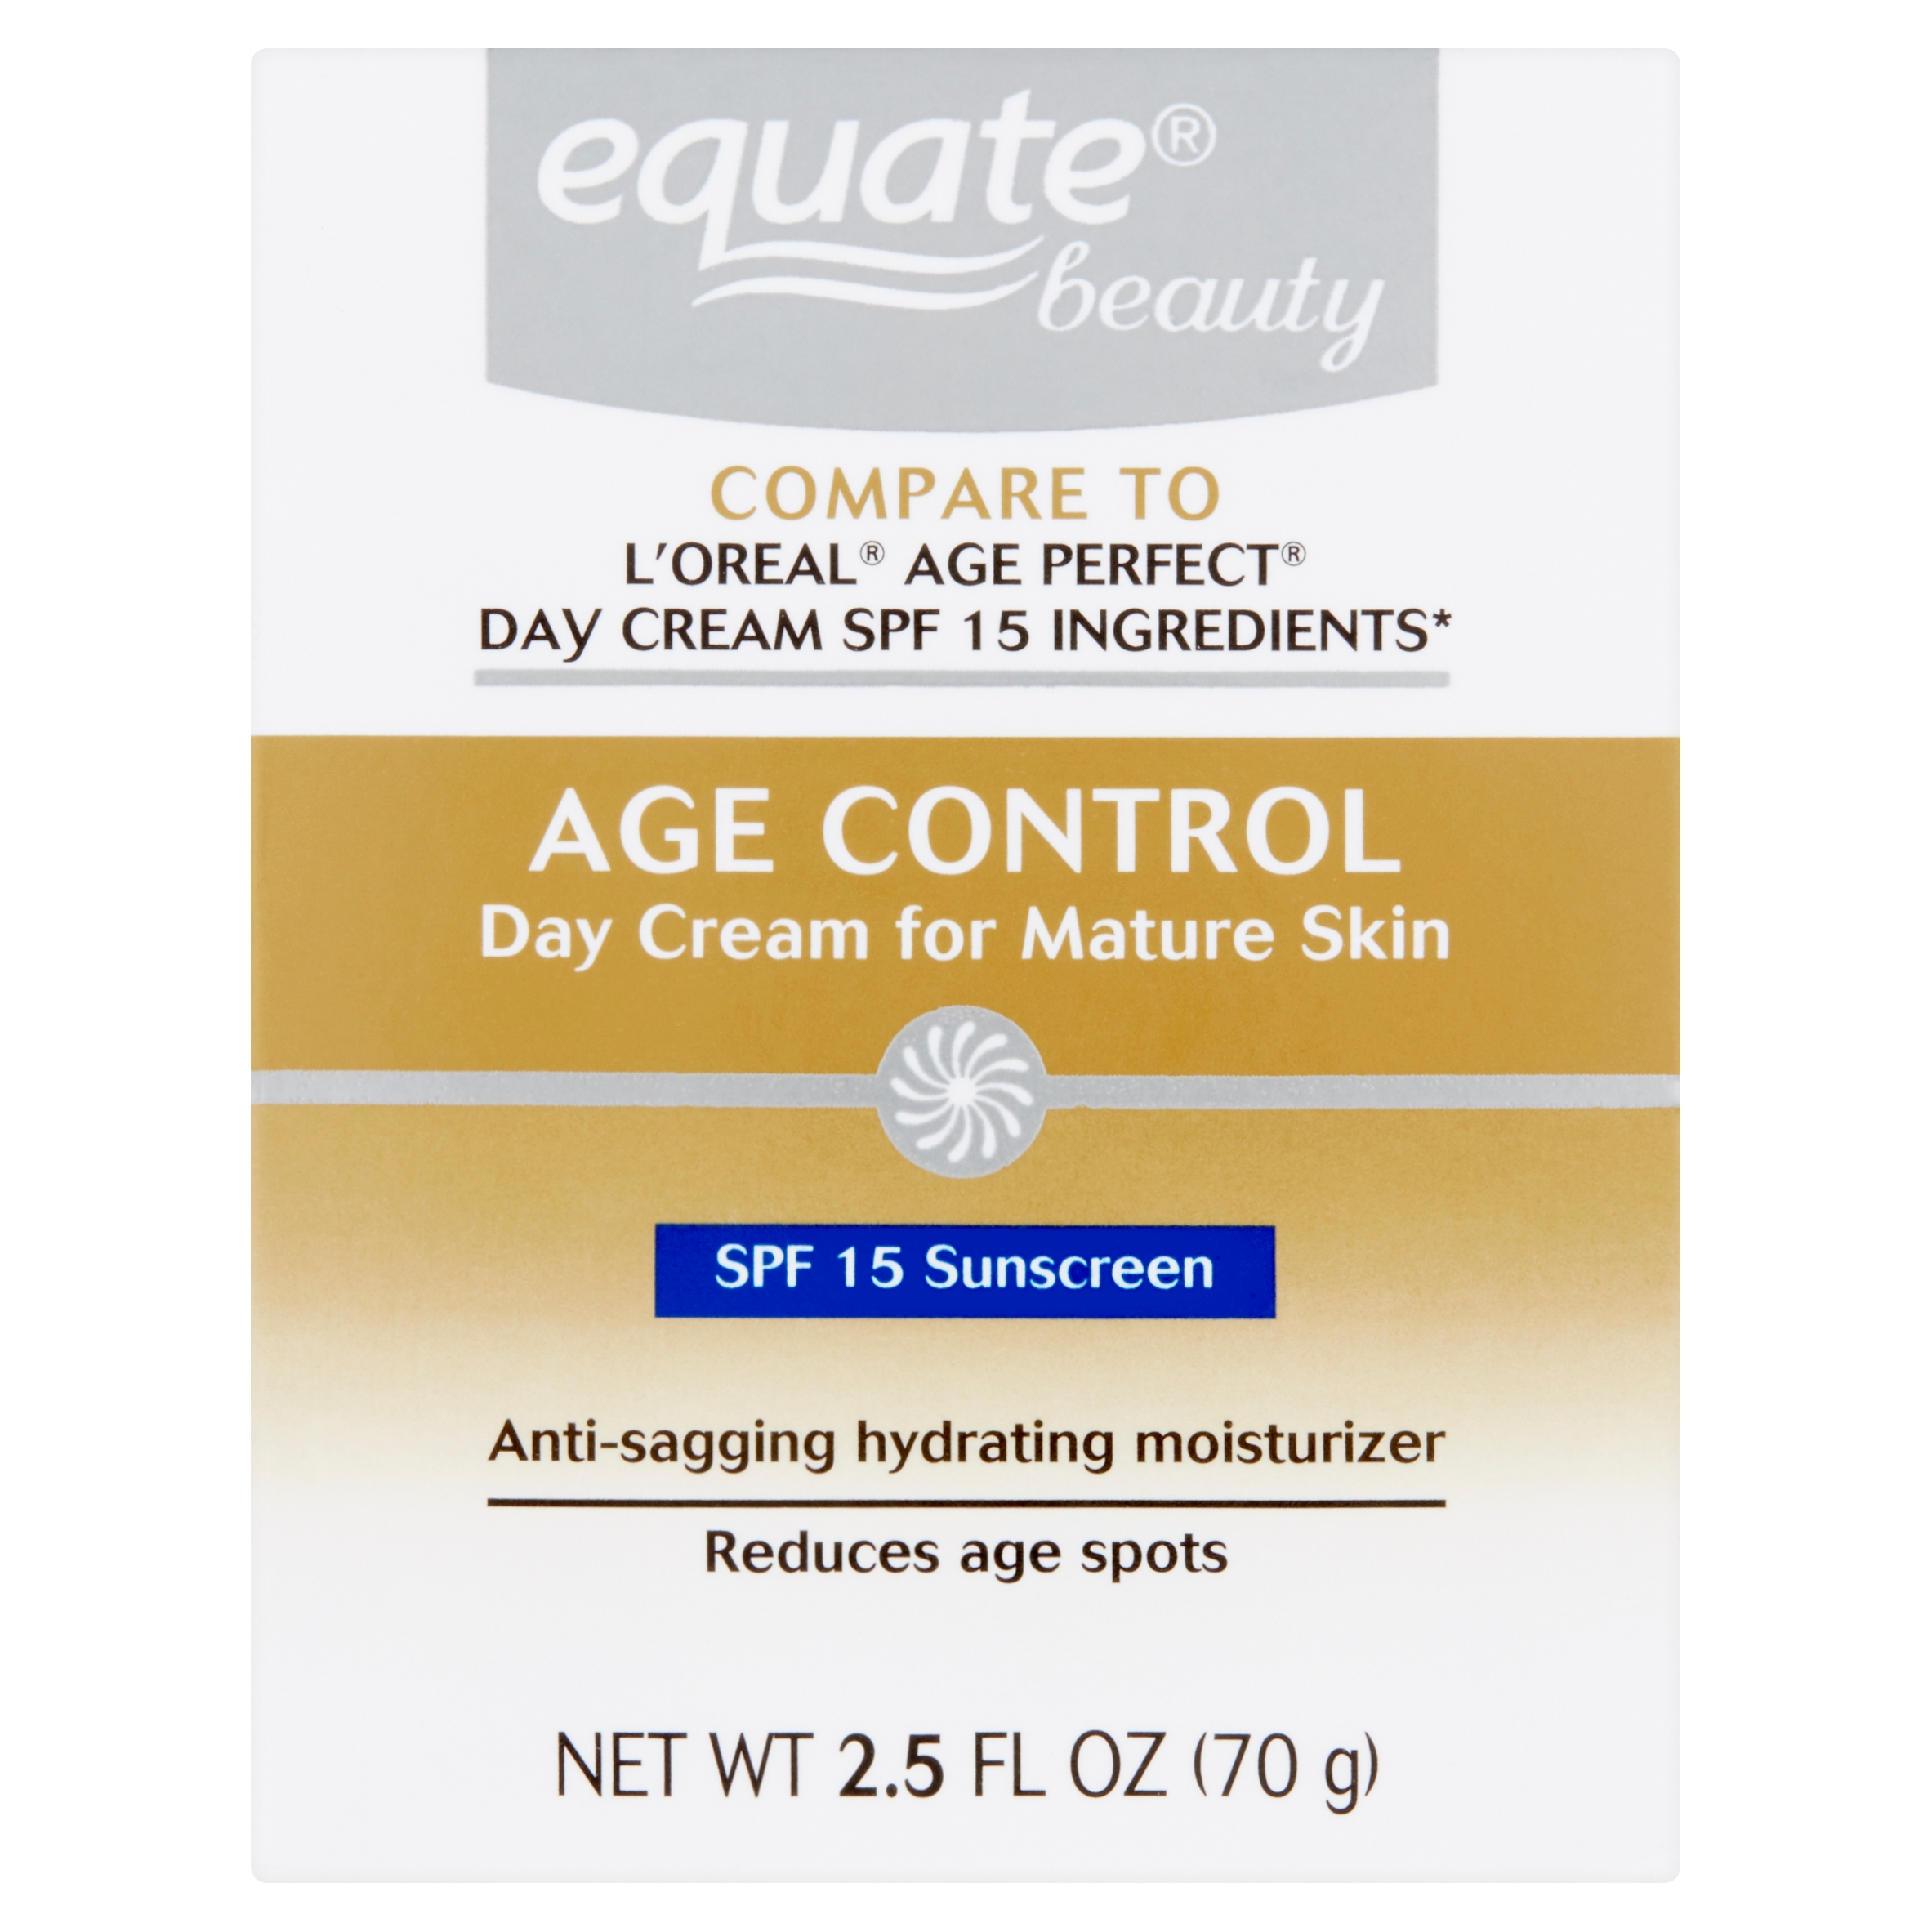 Equate Beauty Age Control Day Cream for Mature Skin Sunscreen, SPF 15, 2.5 fl oz - image 3 of 10